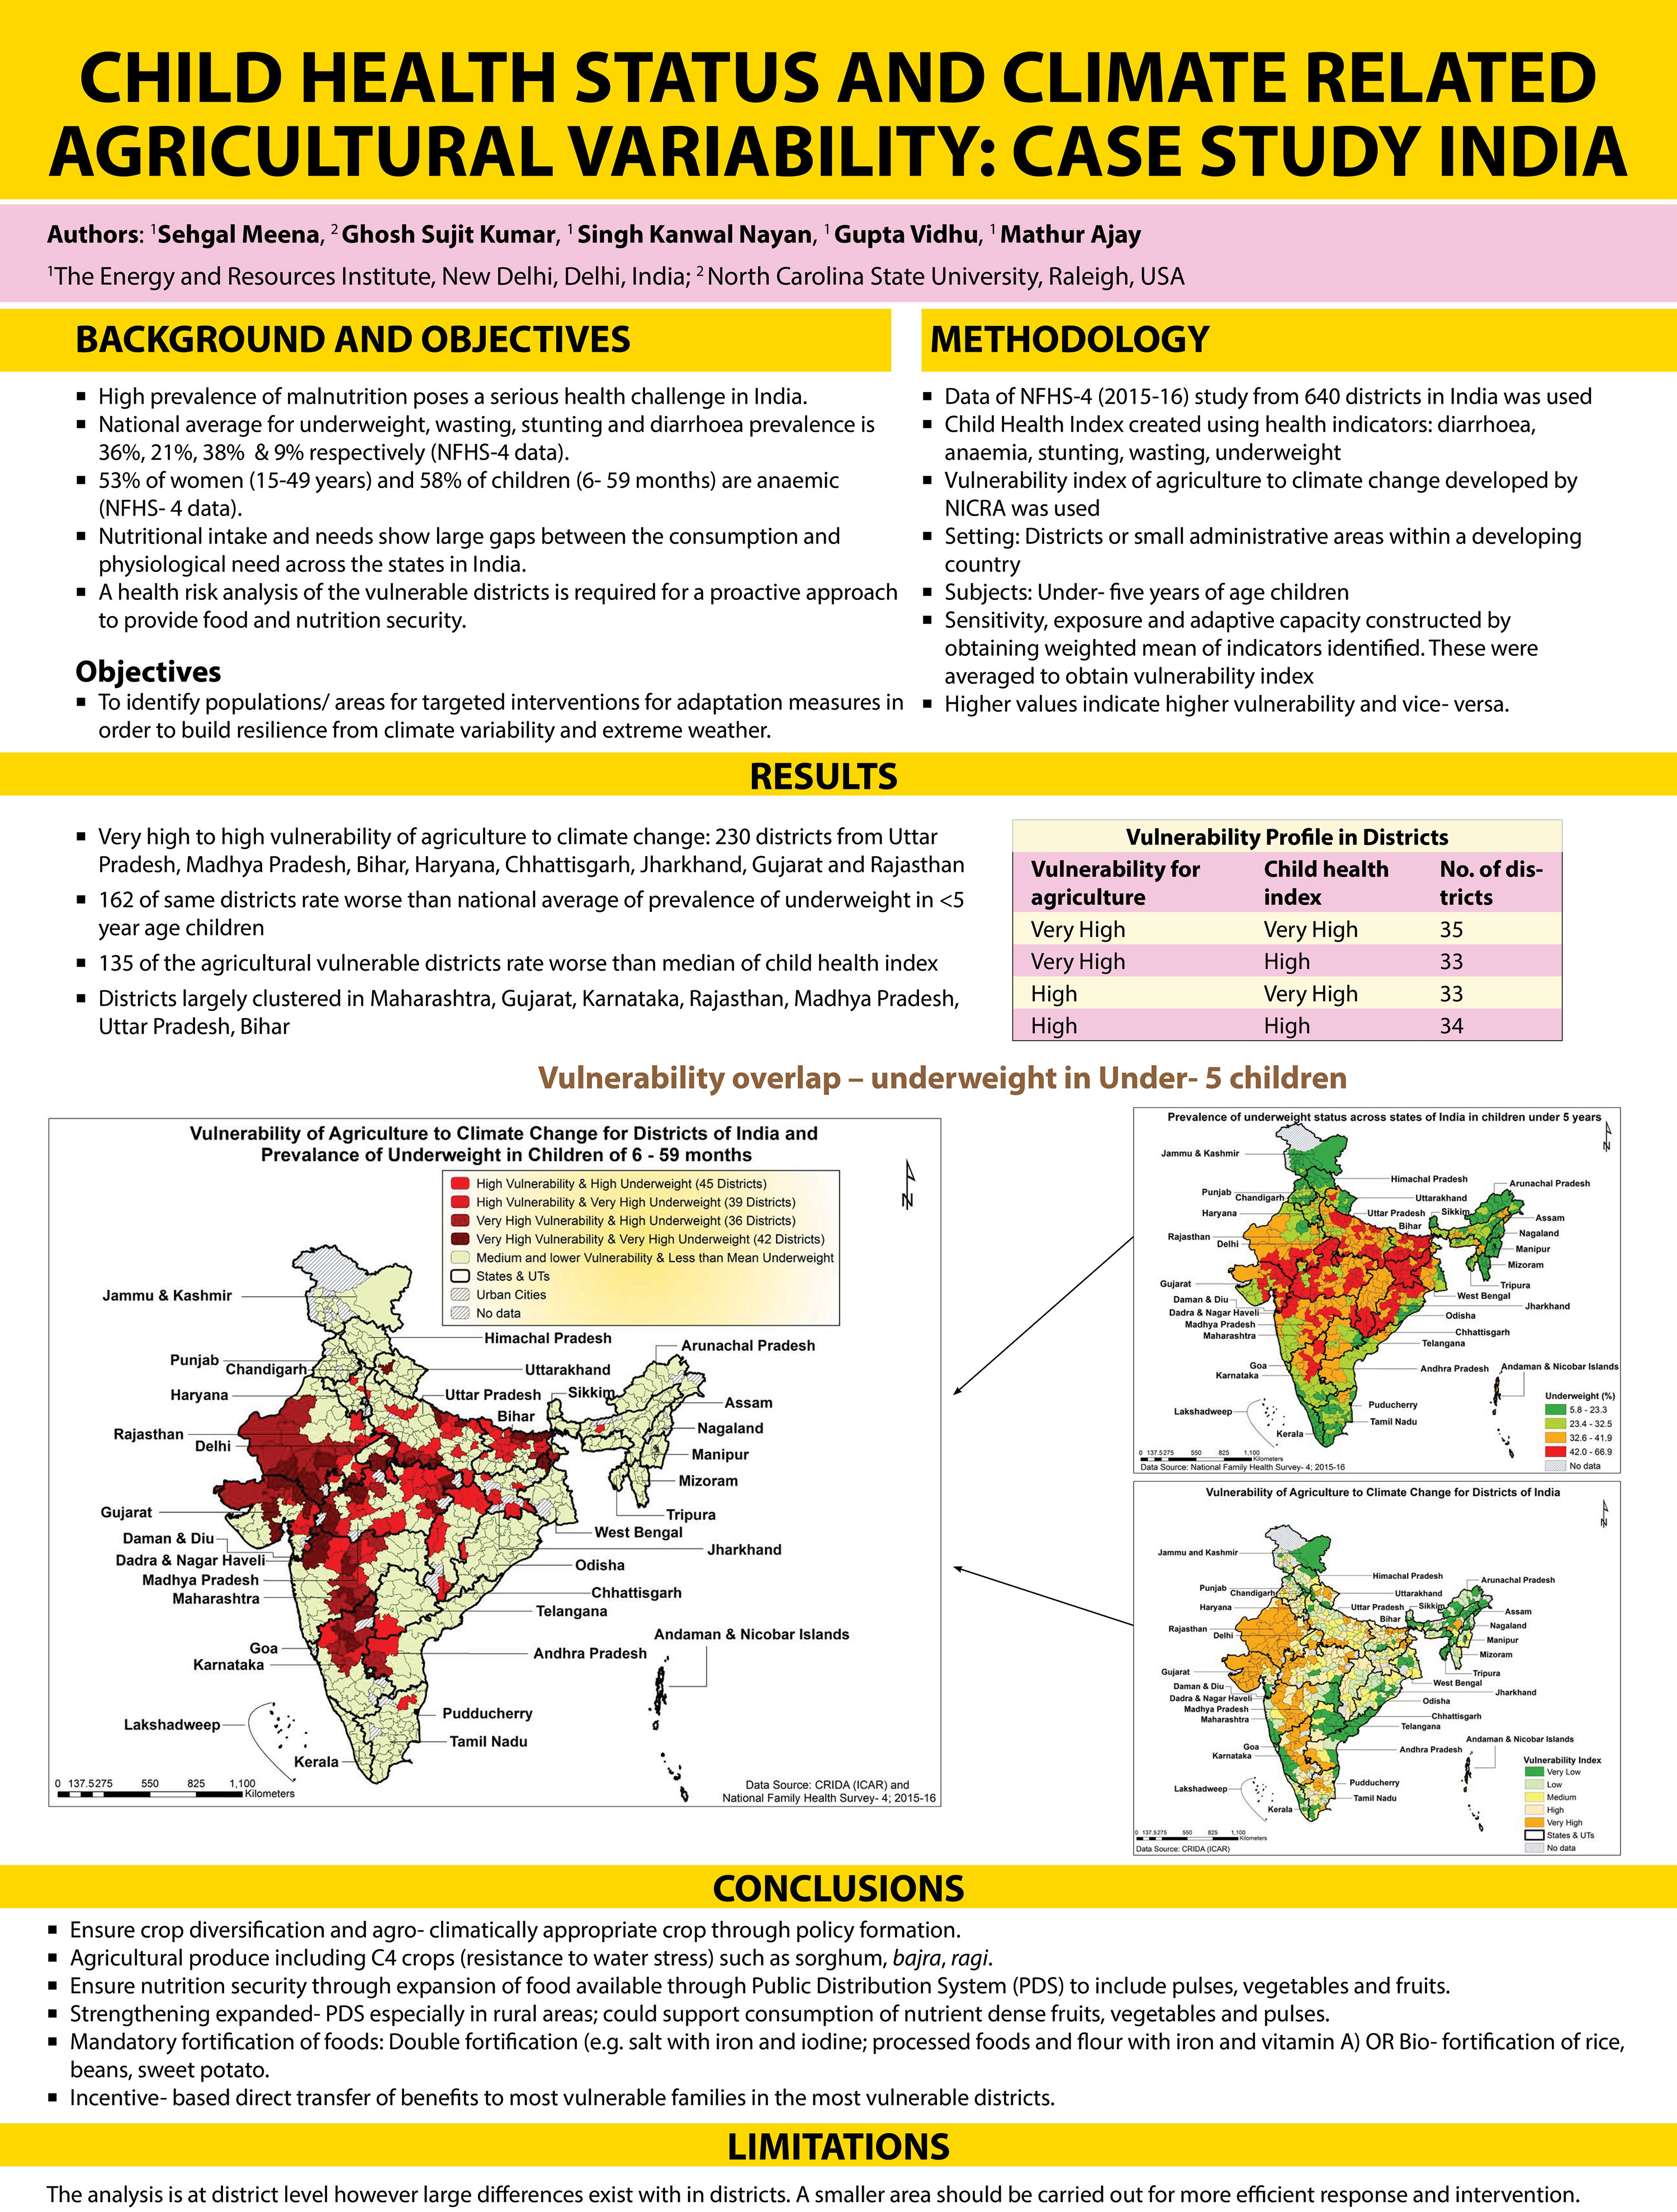 Child health status and climate related agricultural variability: case study India